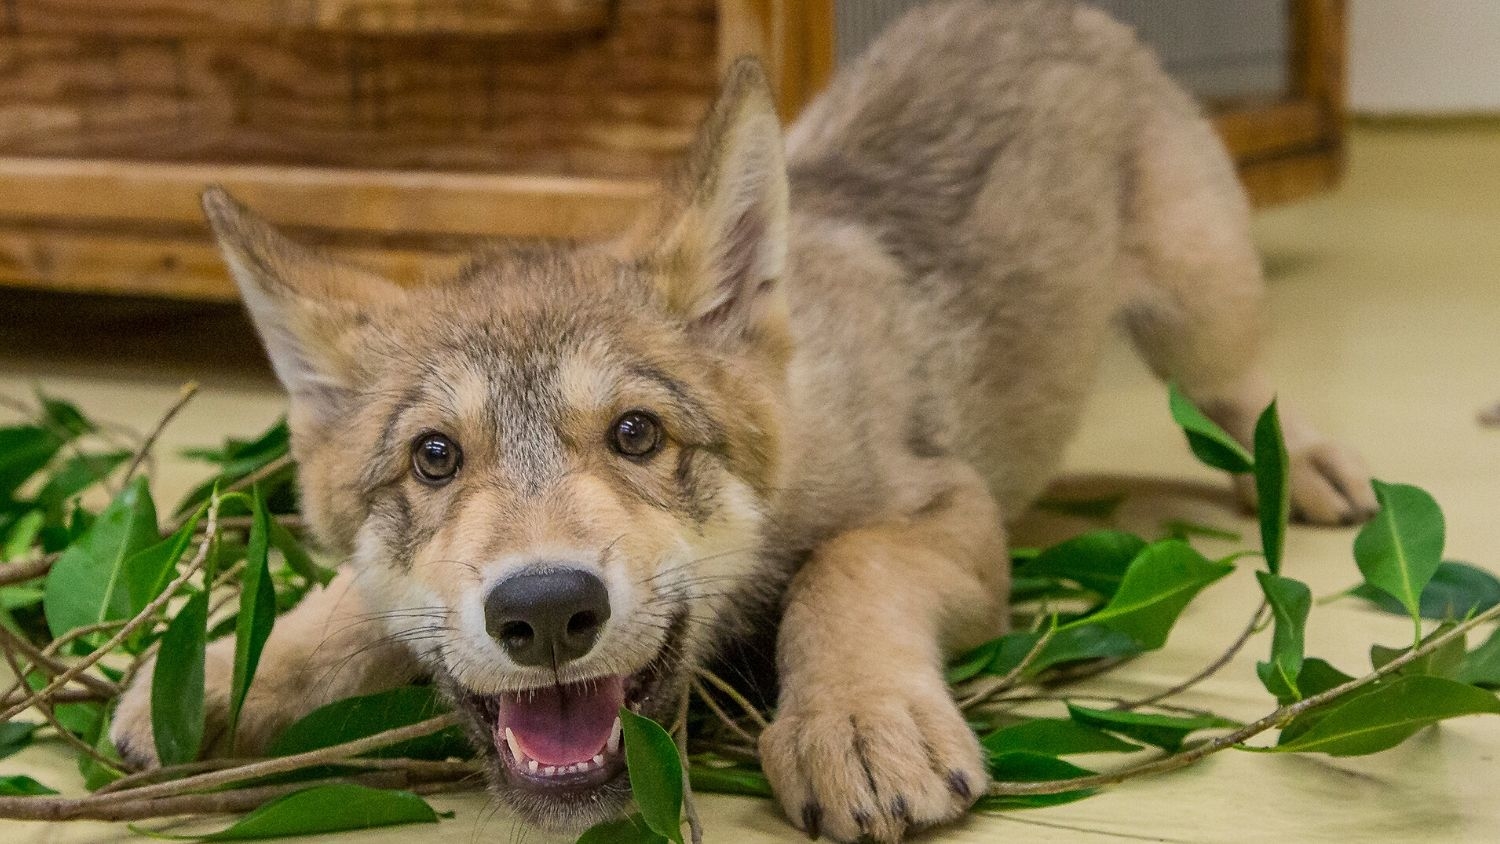 Shadow, a wolf at the San Diego Zoo, when he was a pup in 2014 - Positive YouTube Videos of Wolves Linked to Greater Tolerance - Forestry and Environmental Resources NC State University